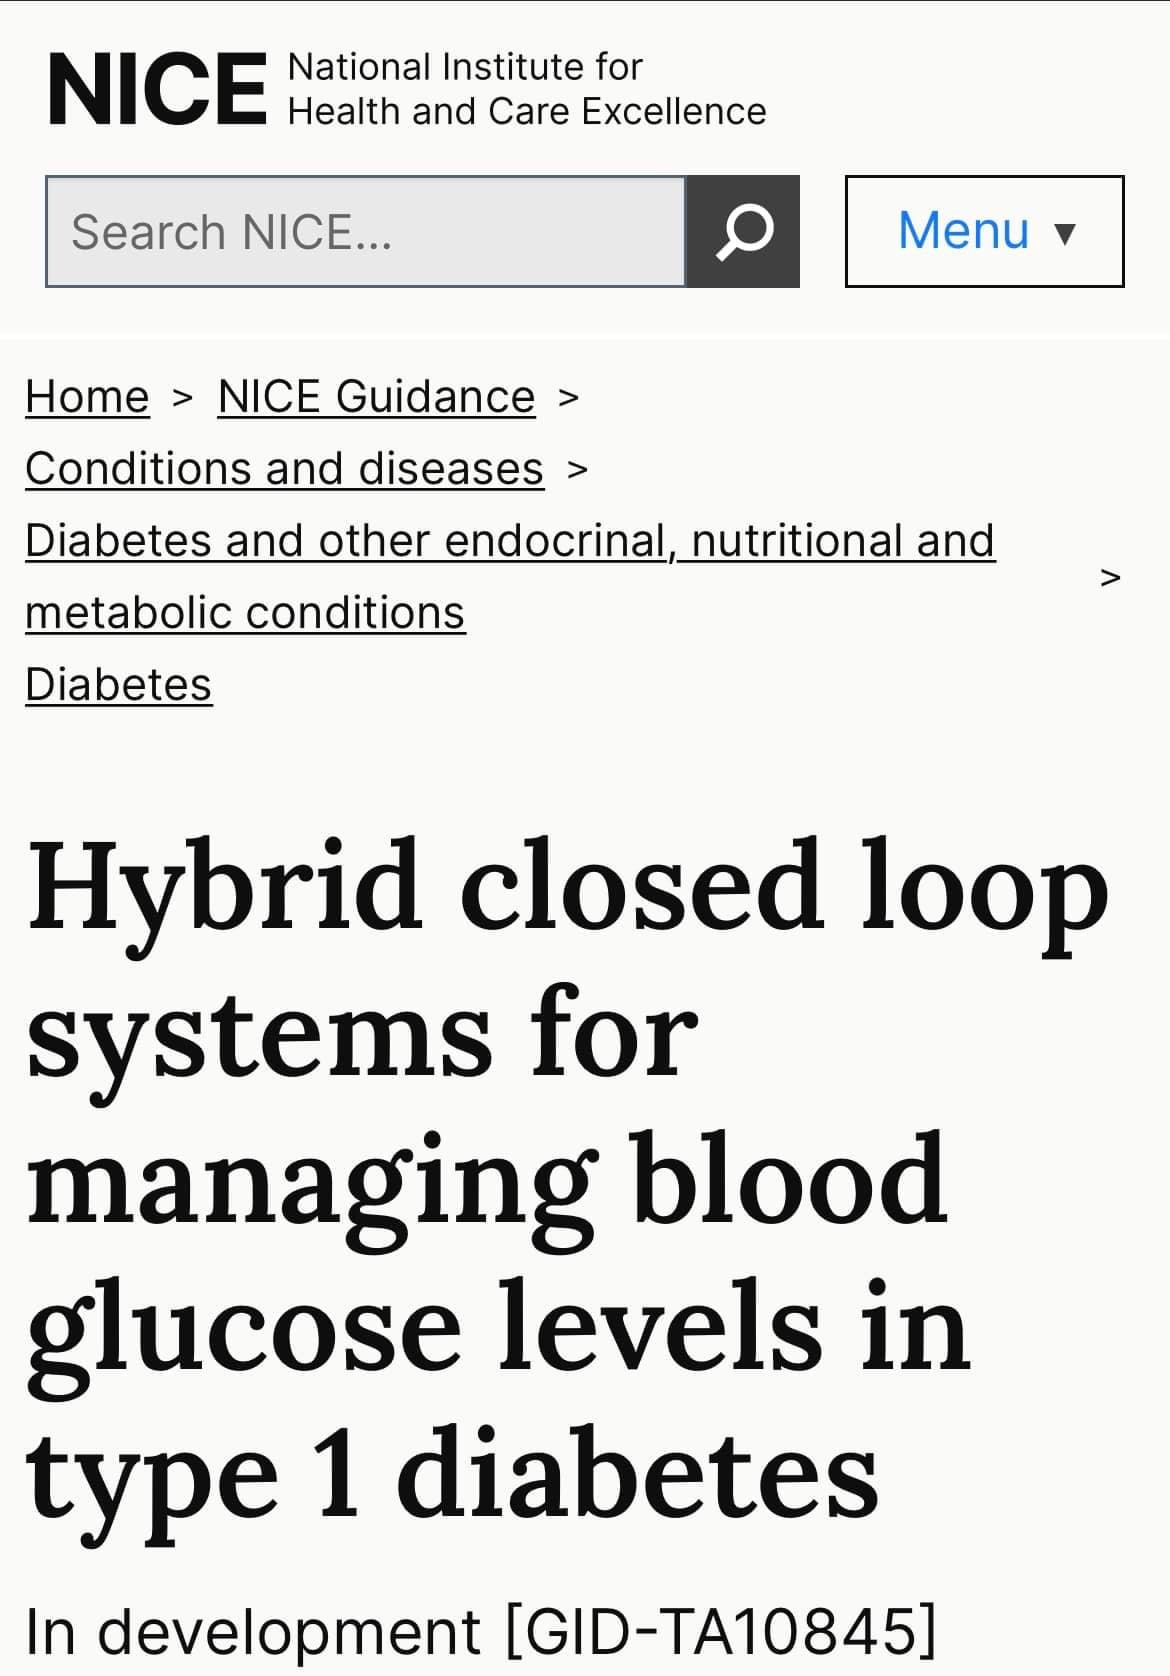 Your chance to comment on NICE's guidance on using hybrid closed loop systems for managing blood glucose levels in type 1 diabetes.